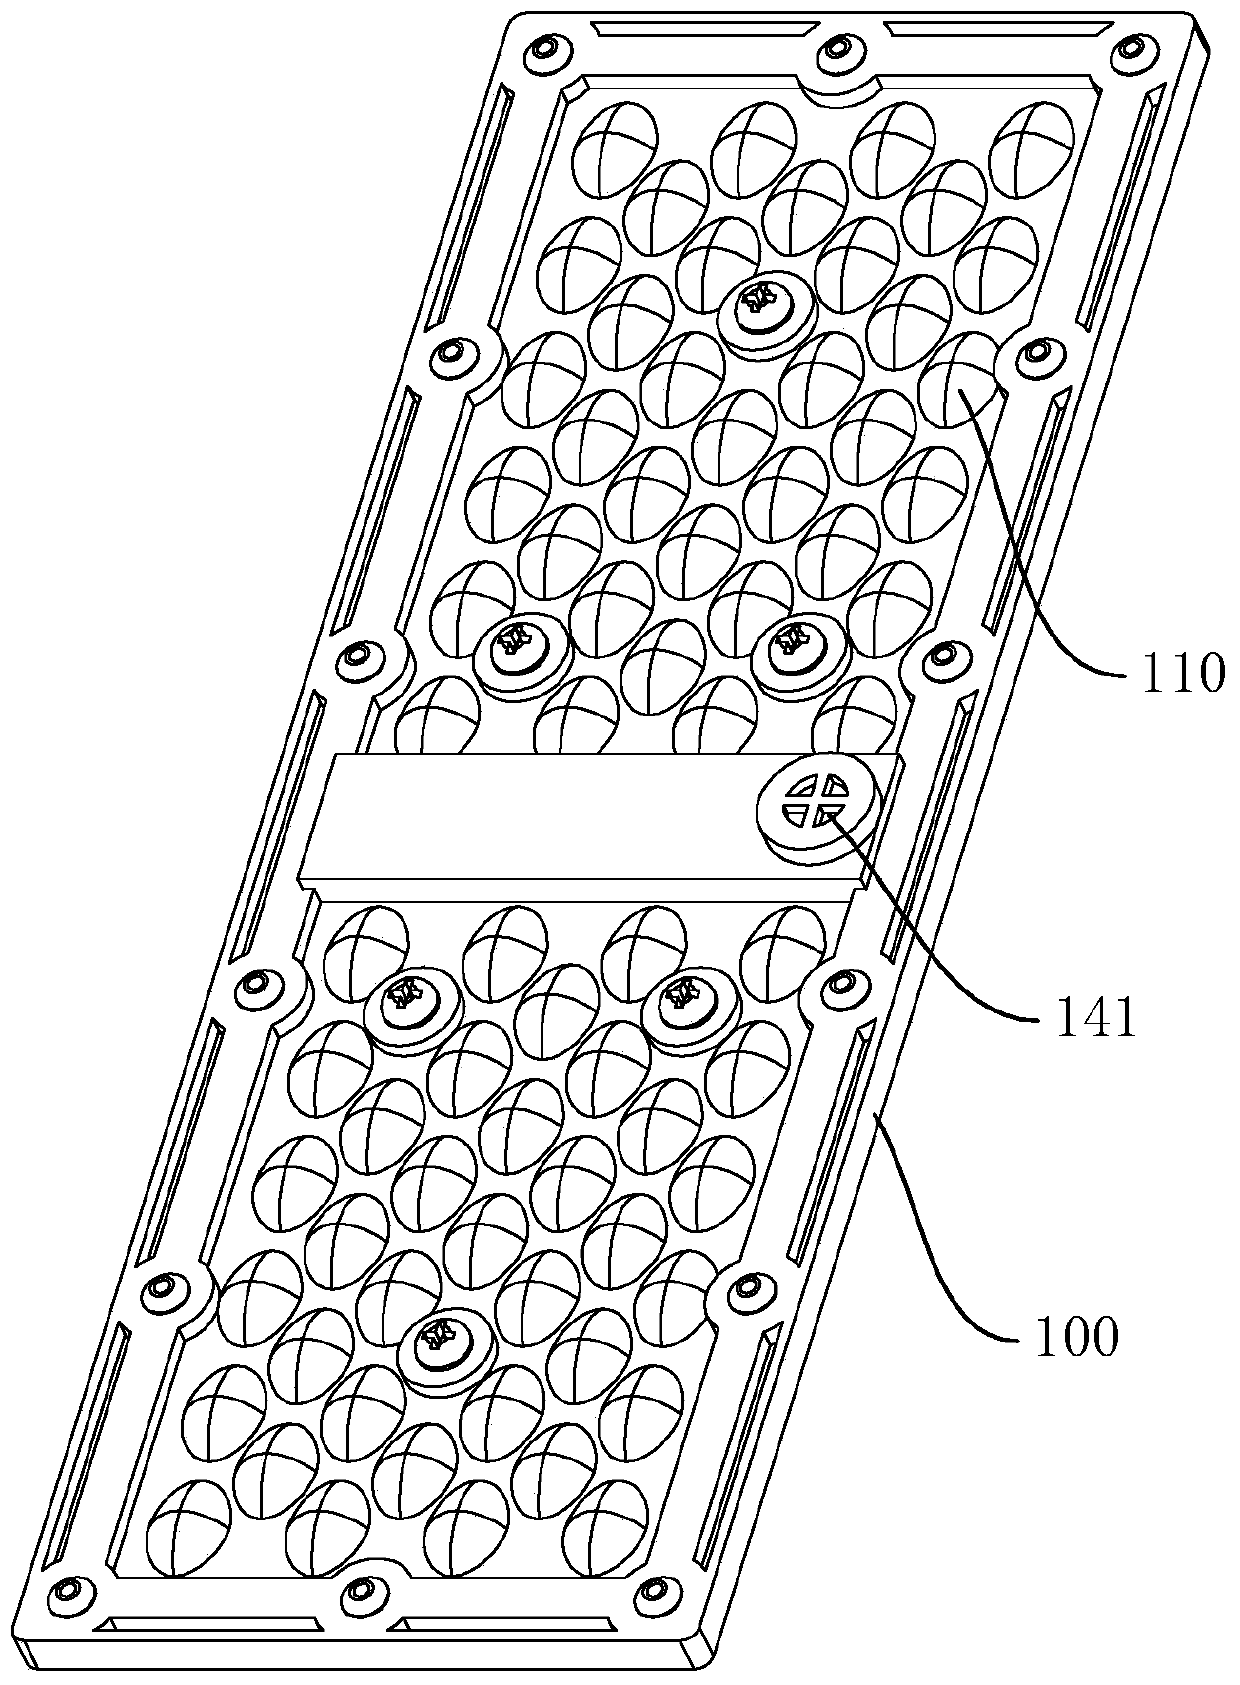 LED module, lamp and mounting method